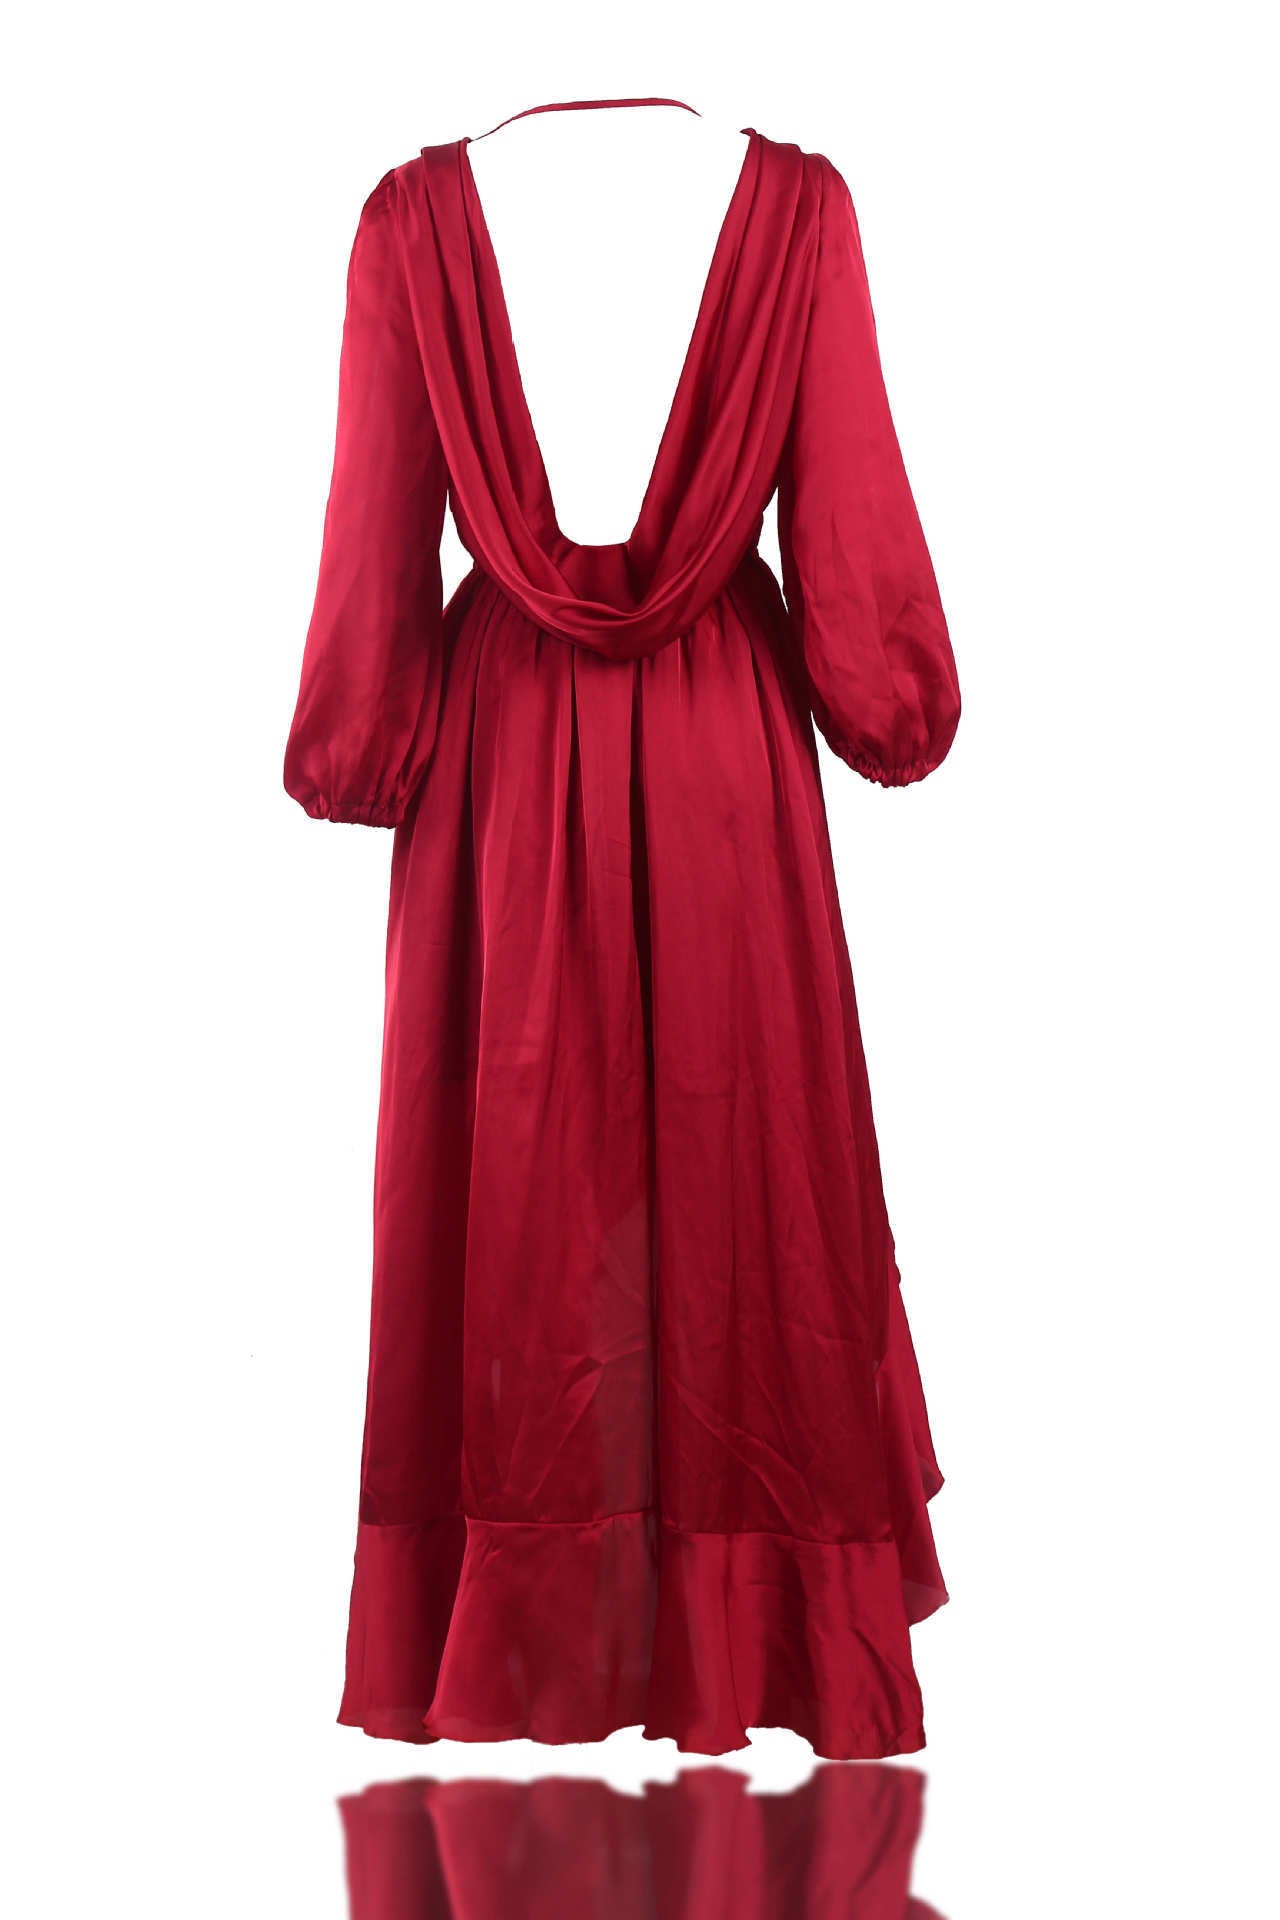 Wine Red Summer Long Beach Holiday Dresses